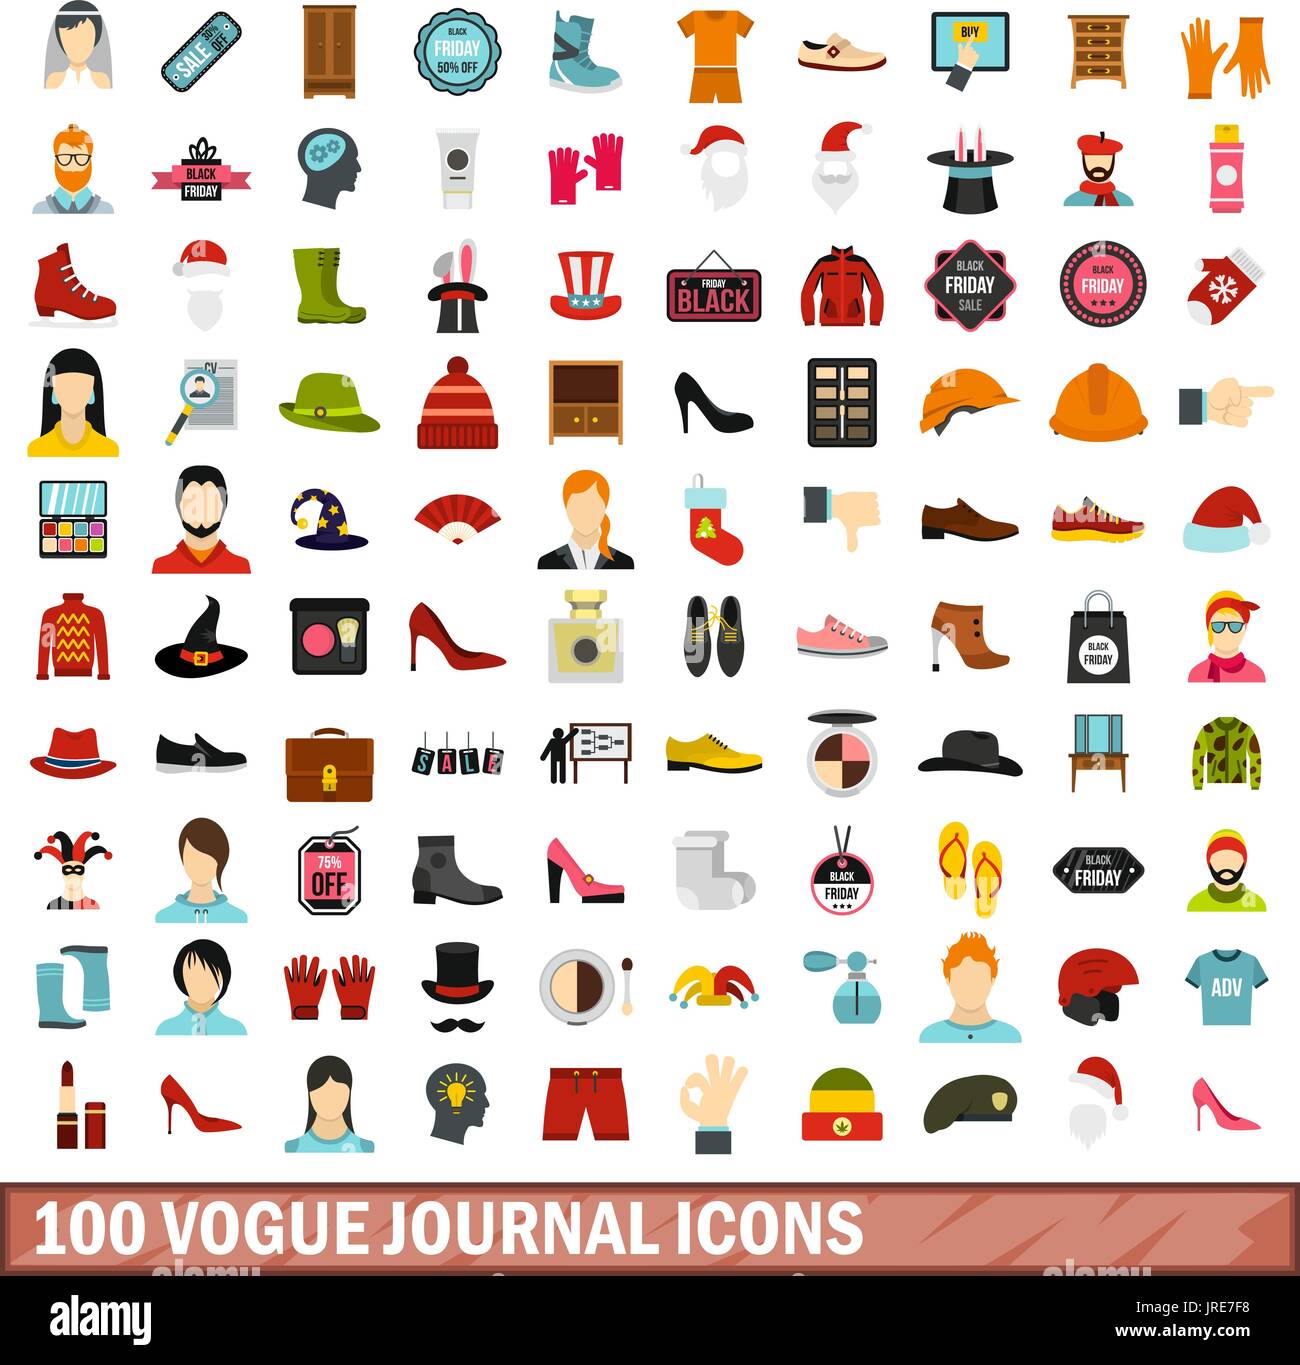 100 vogue journal icons set, flat style Stock Vector